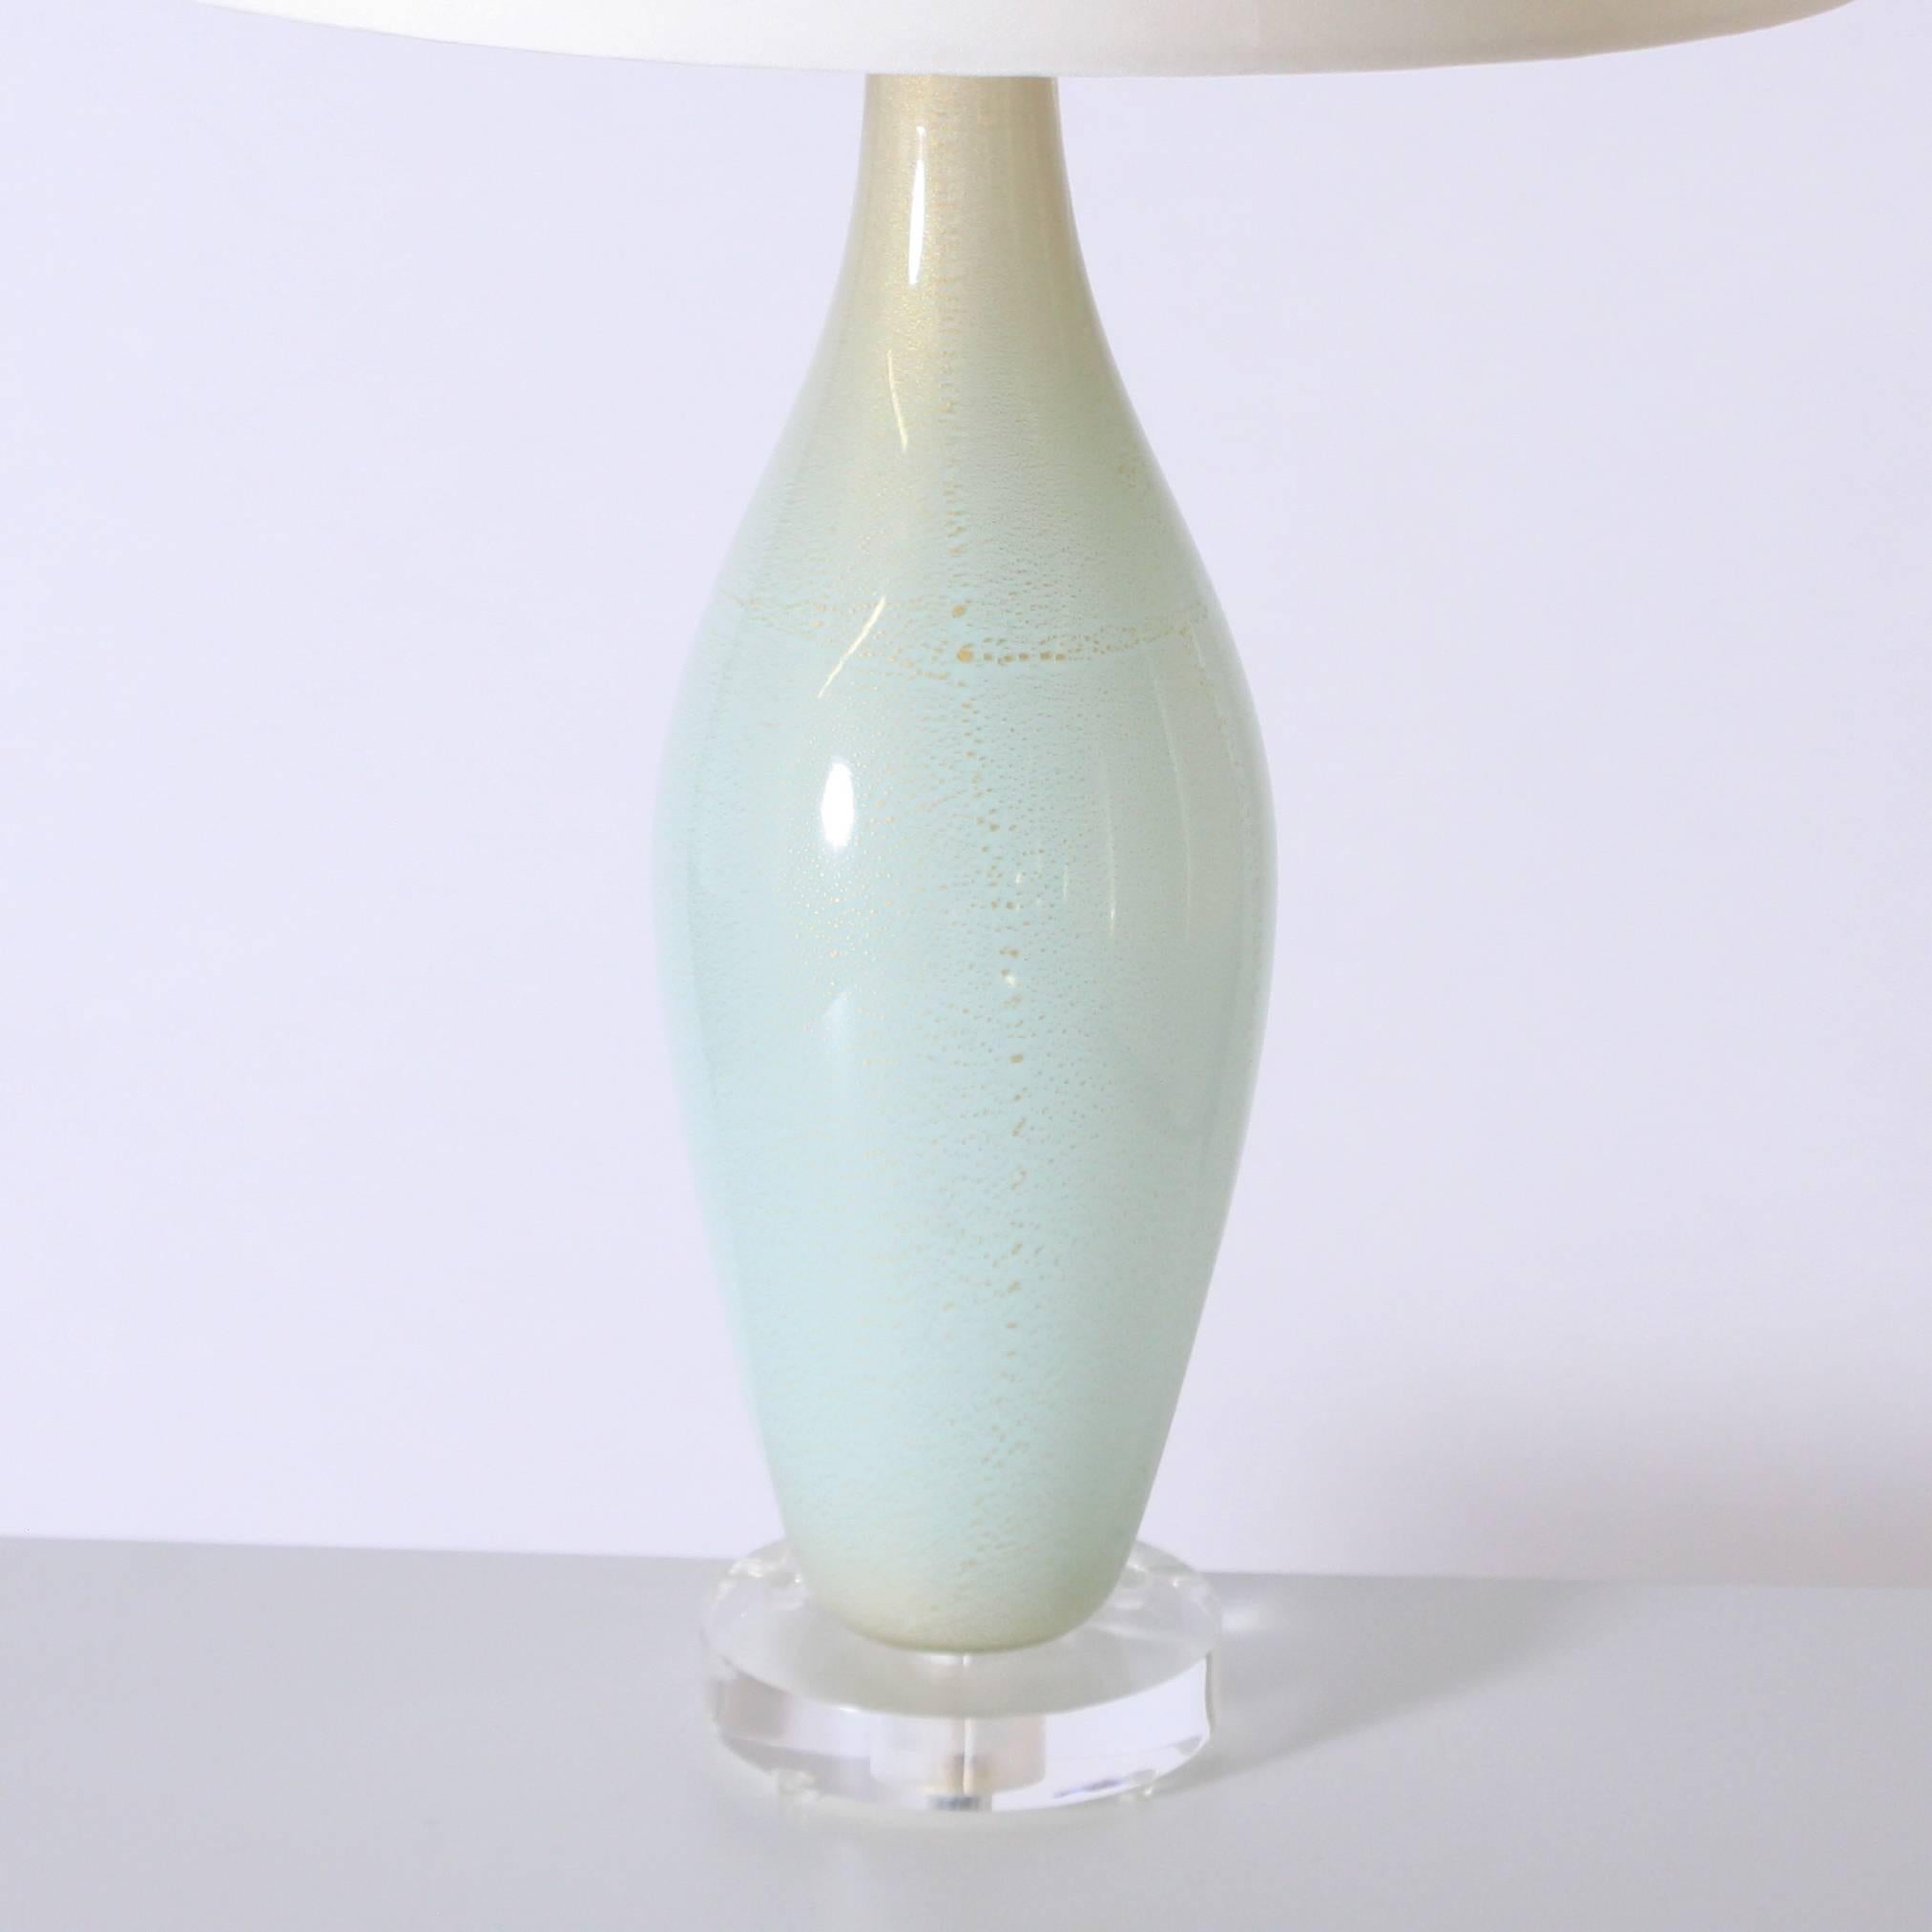 1940s, Murano glass lamp with 22-karat gold flecks. Off-white pongee shade is included.
Measures: 17